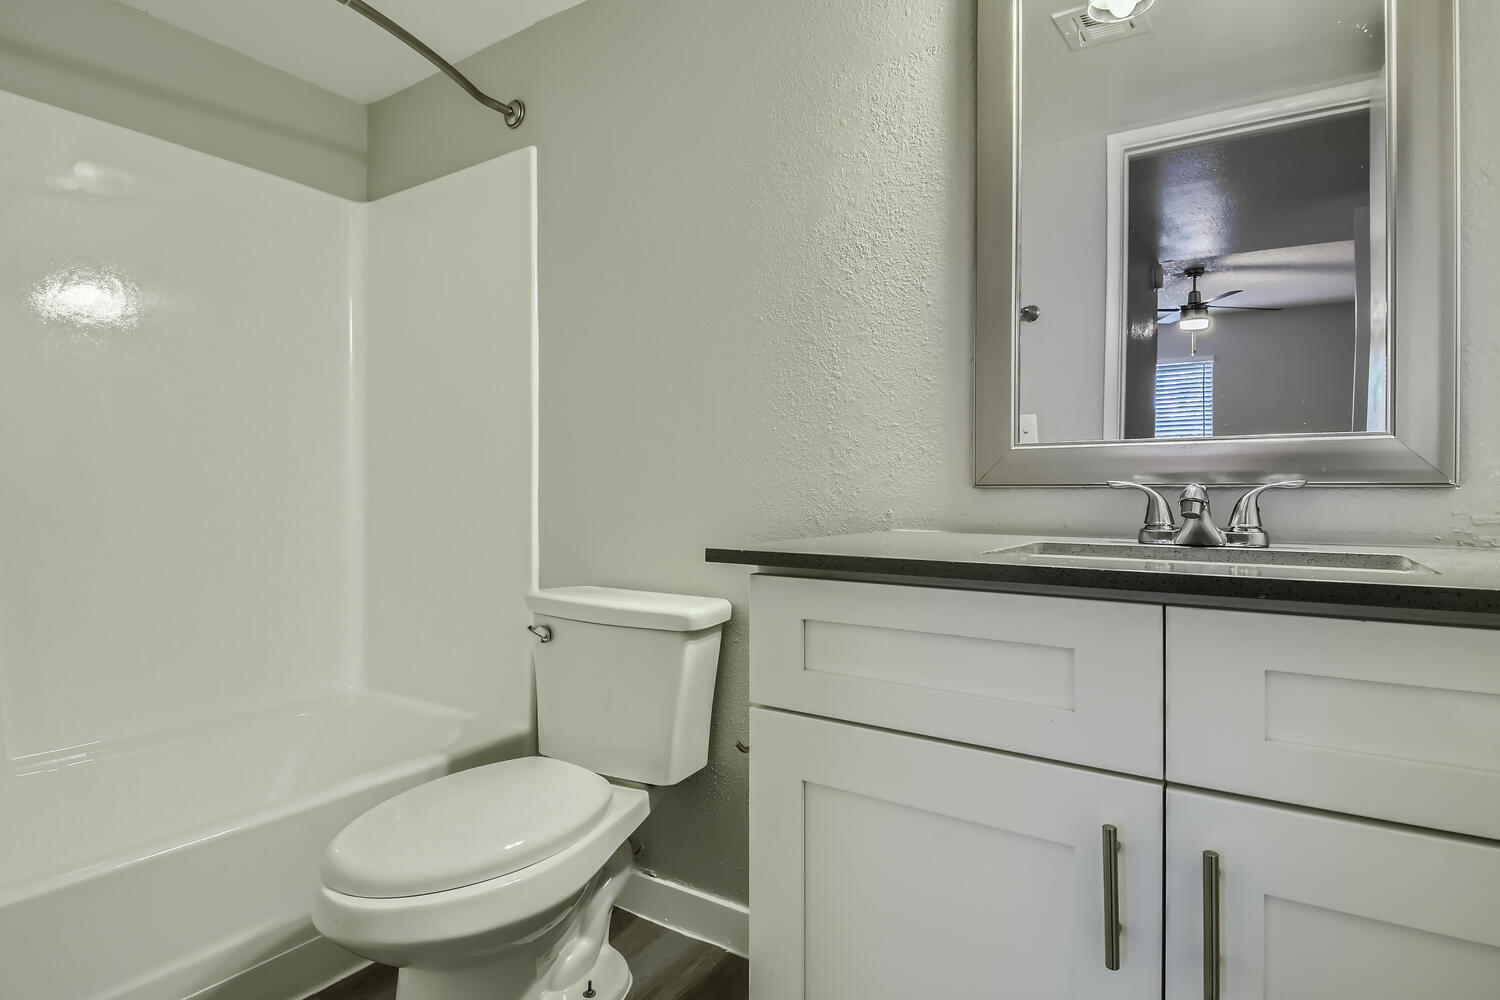 A bathroom with a vanity, mirror, and a shower at Rise North Ridge.